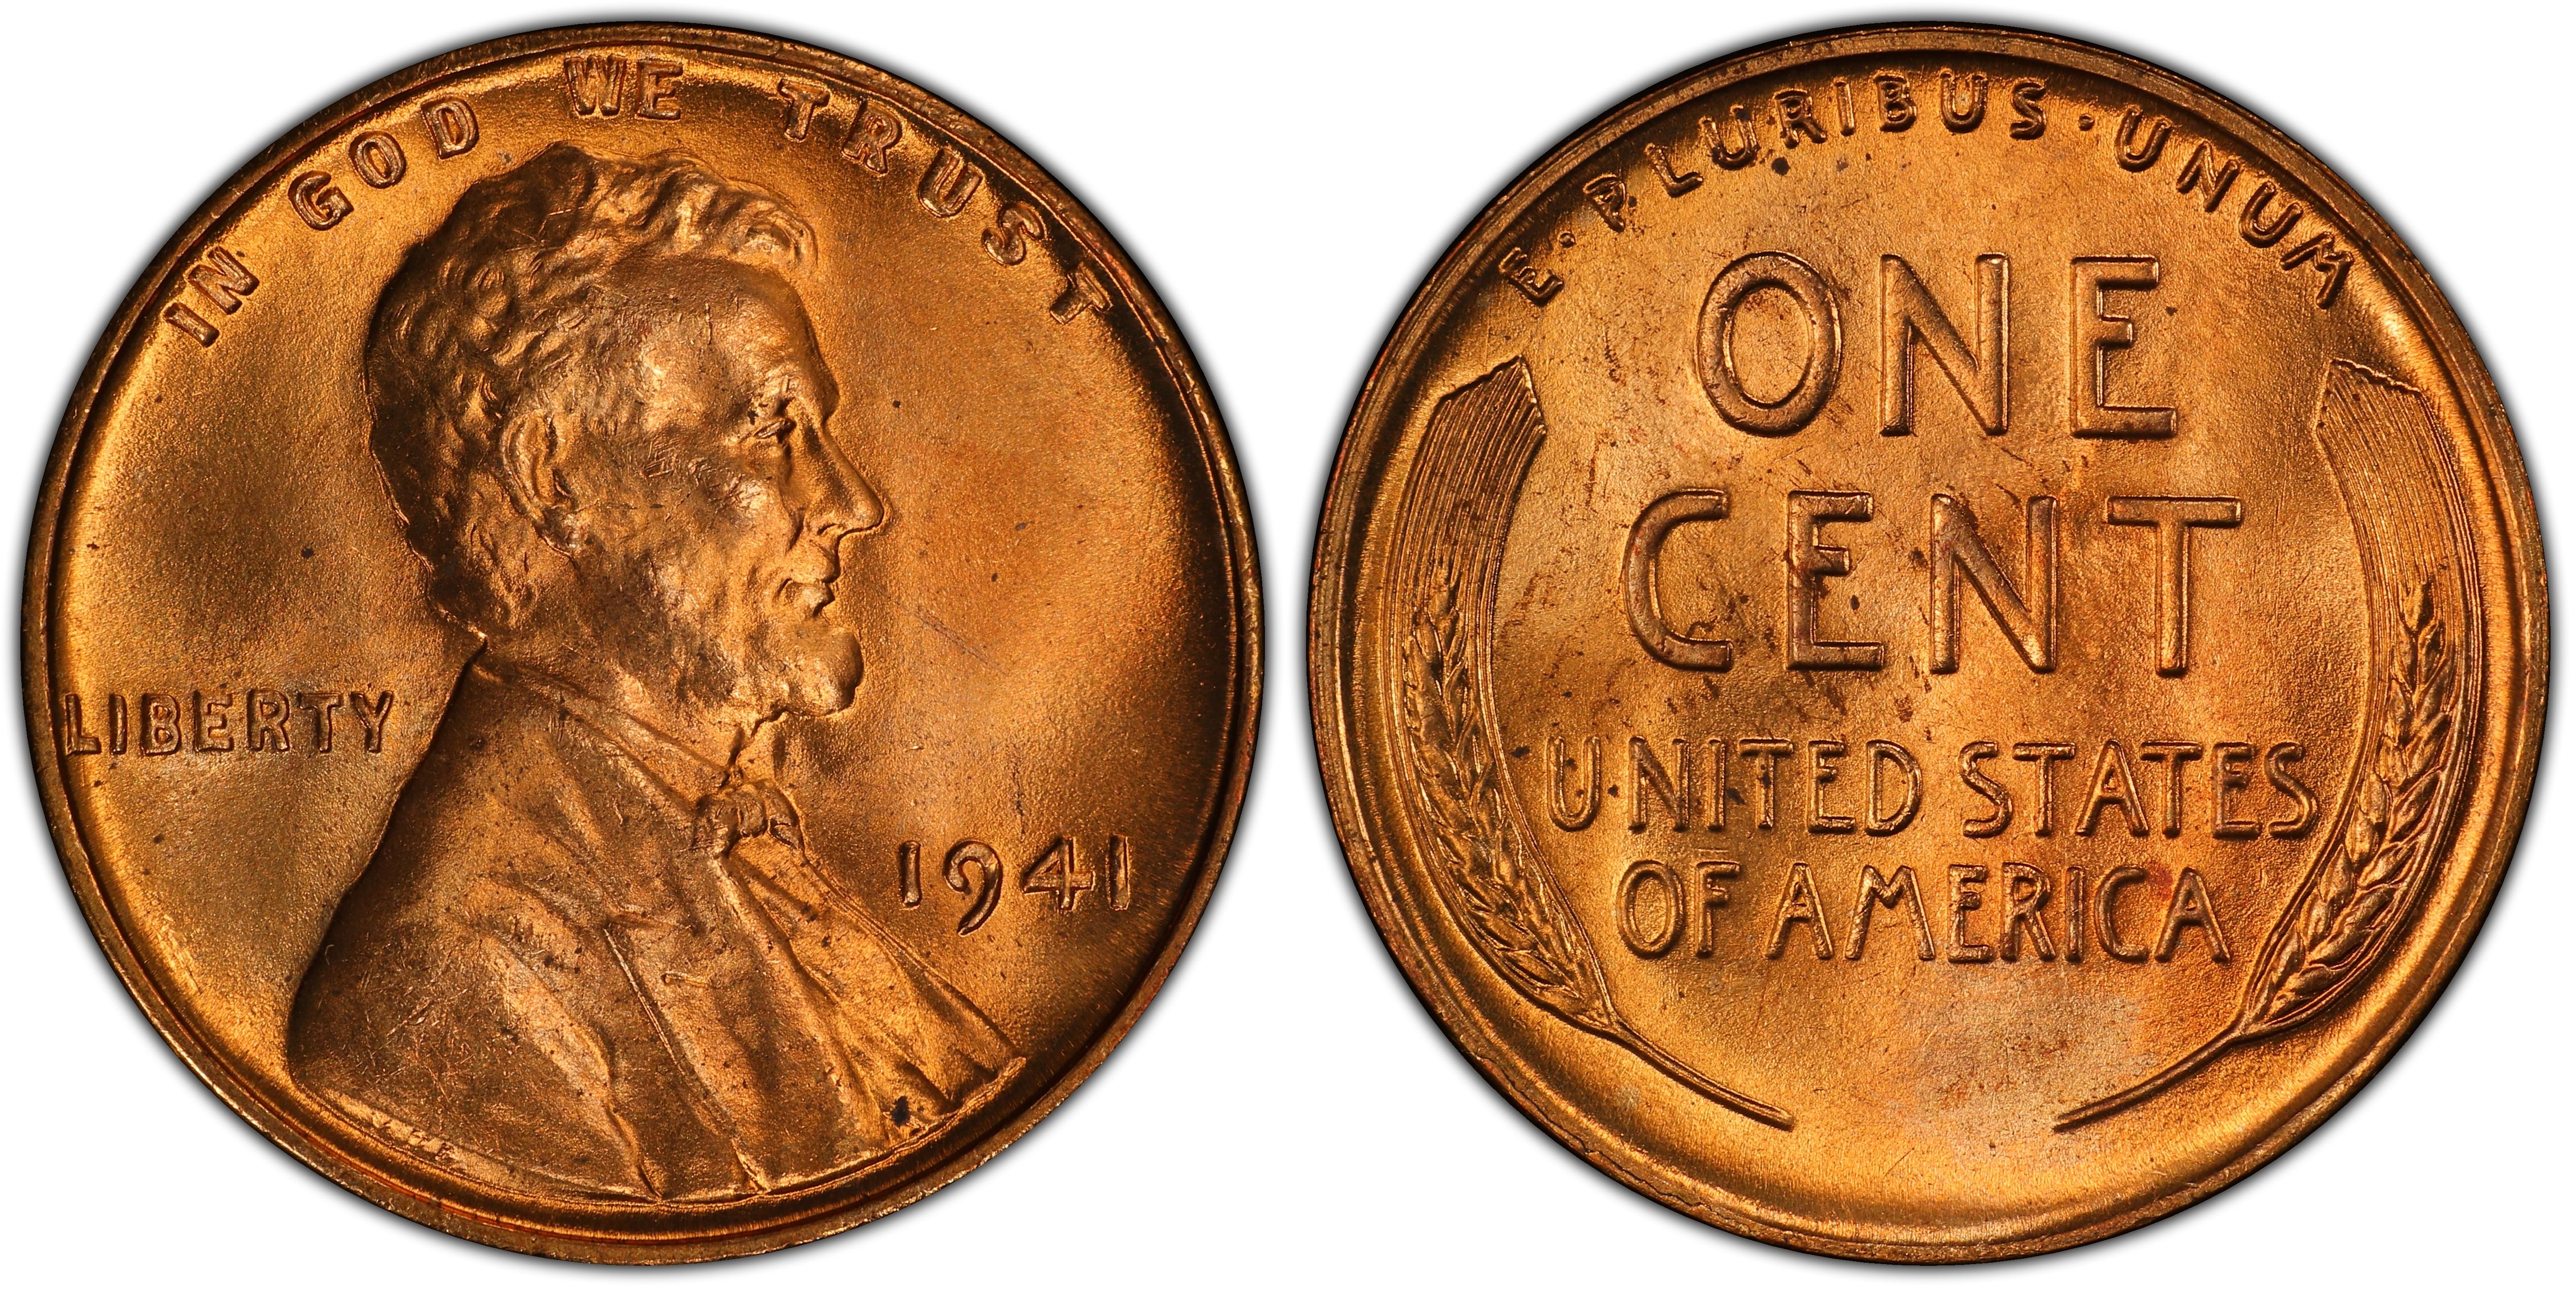 1941 1c Doubled Die Obverse Rd Regular Strike Lincoln Cent Wheat Reverse Pcgs Coinfacts,Ceramic Smoker Bbq